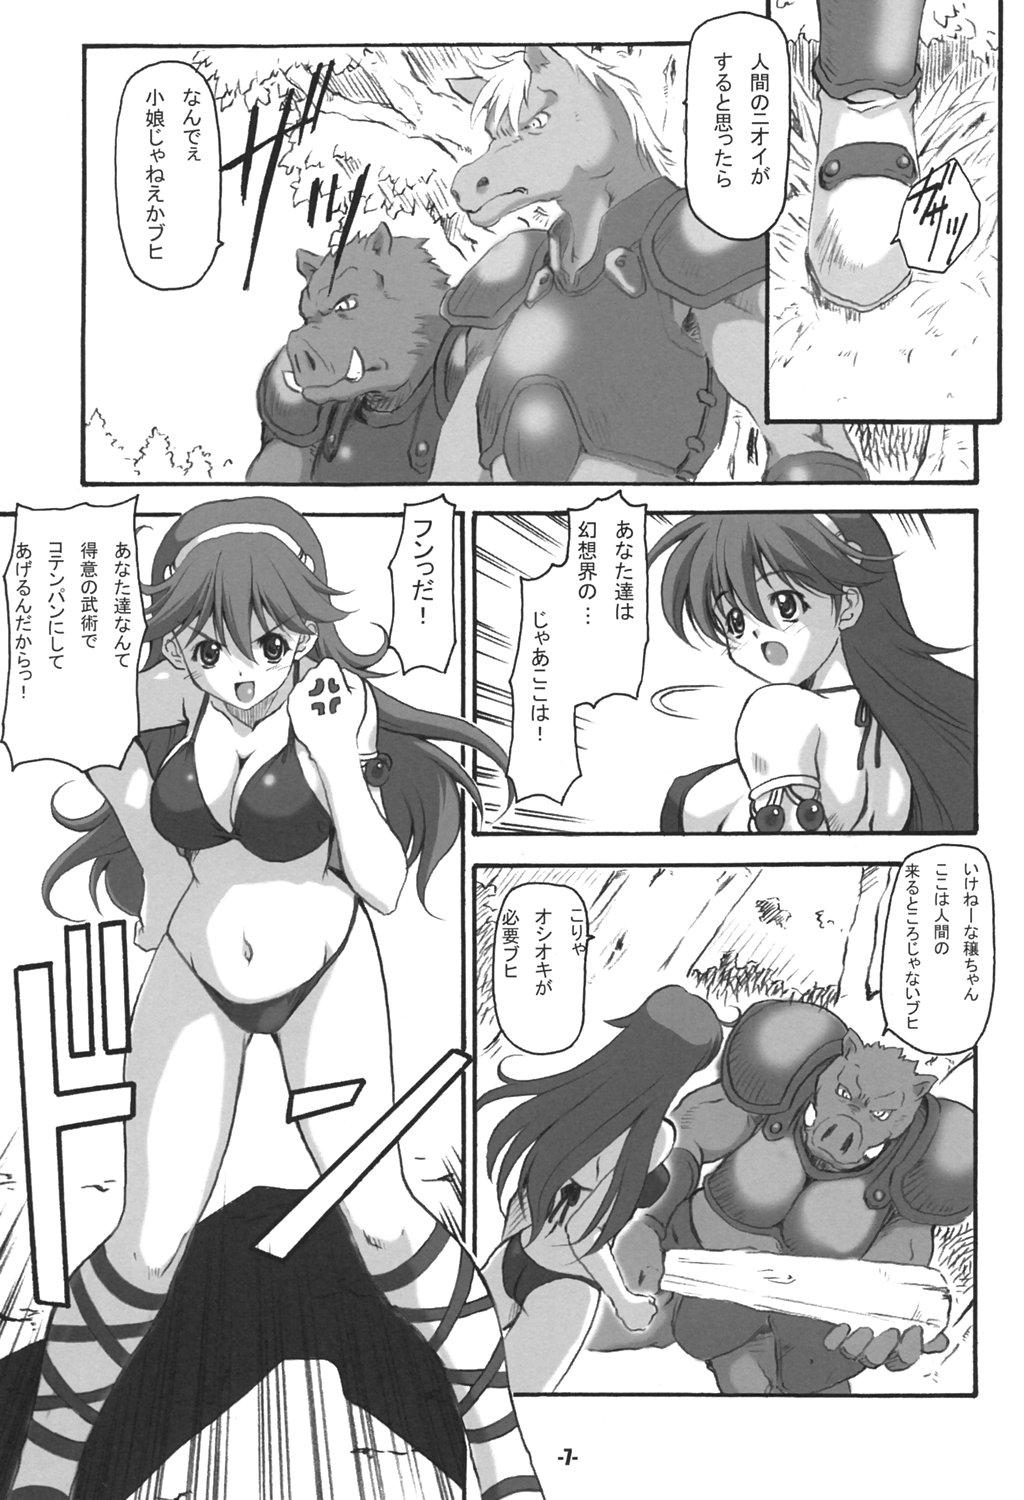 Topless A's EXtra strage vol. 18 - King of fighters Gape - Page 6